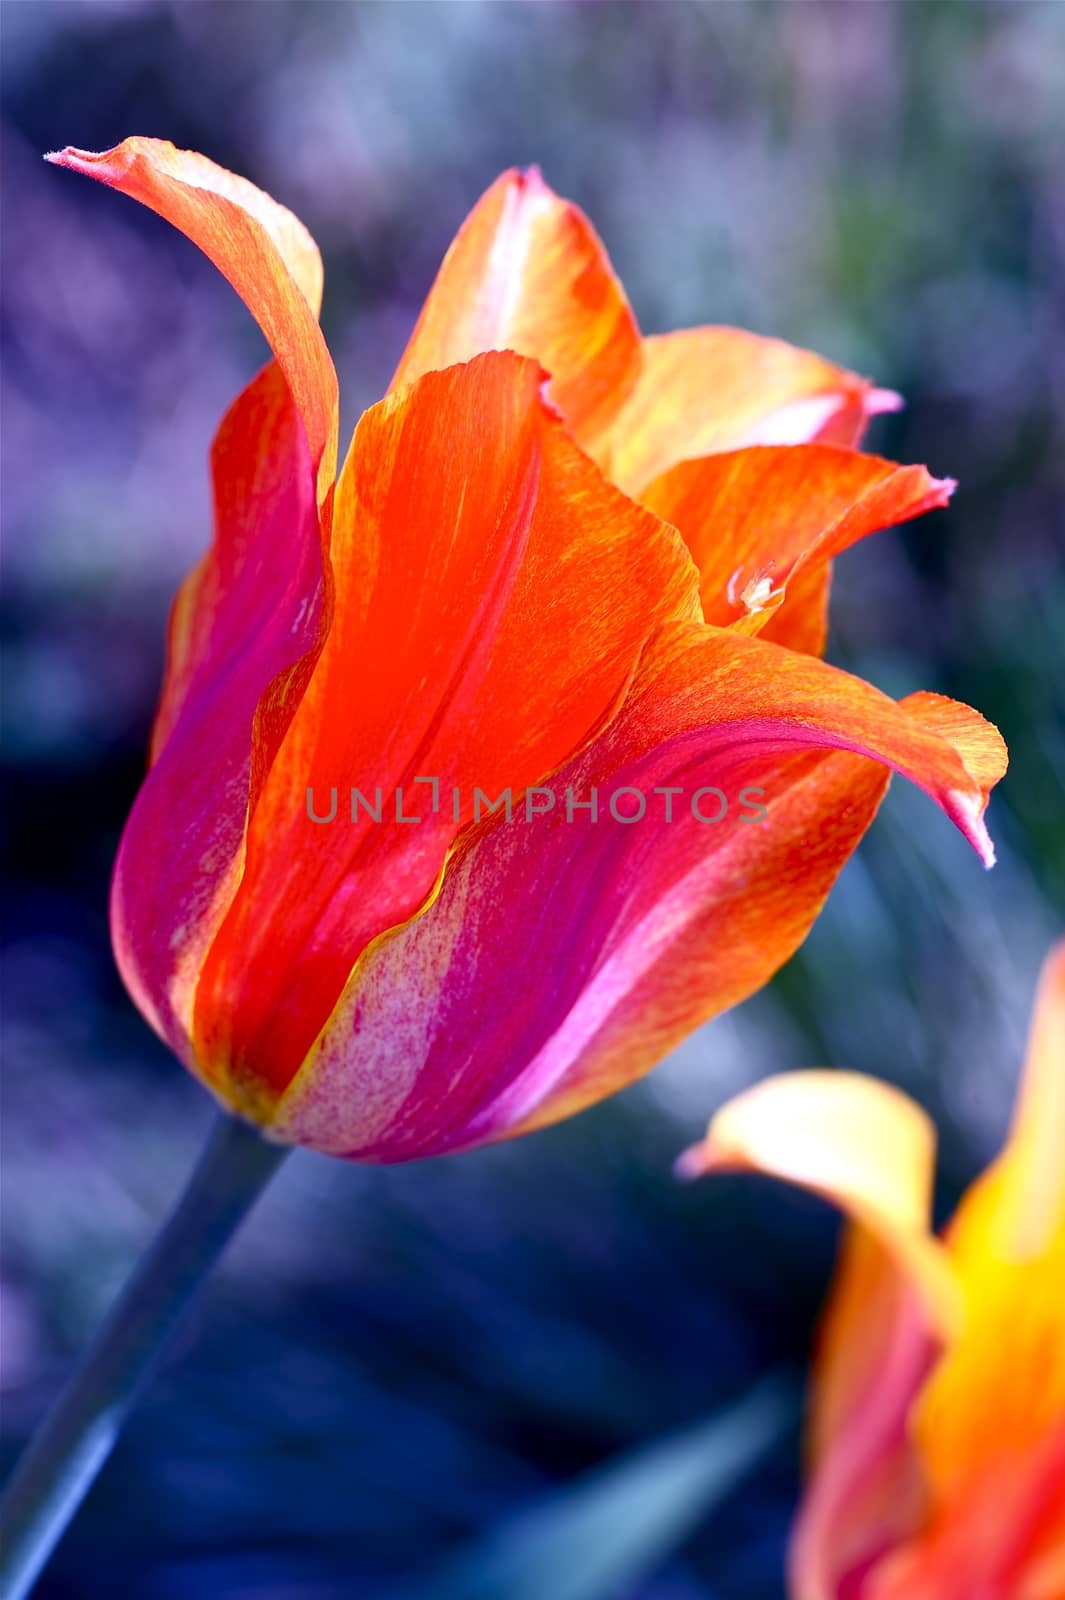 Tulips in Vertical Photography. Red Blossom Tulips